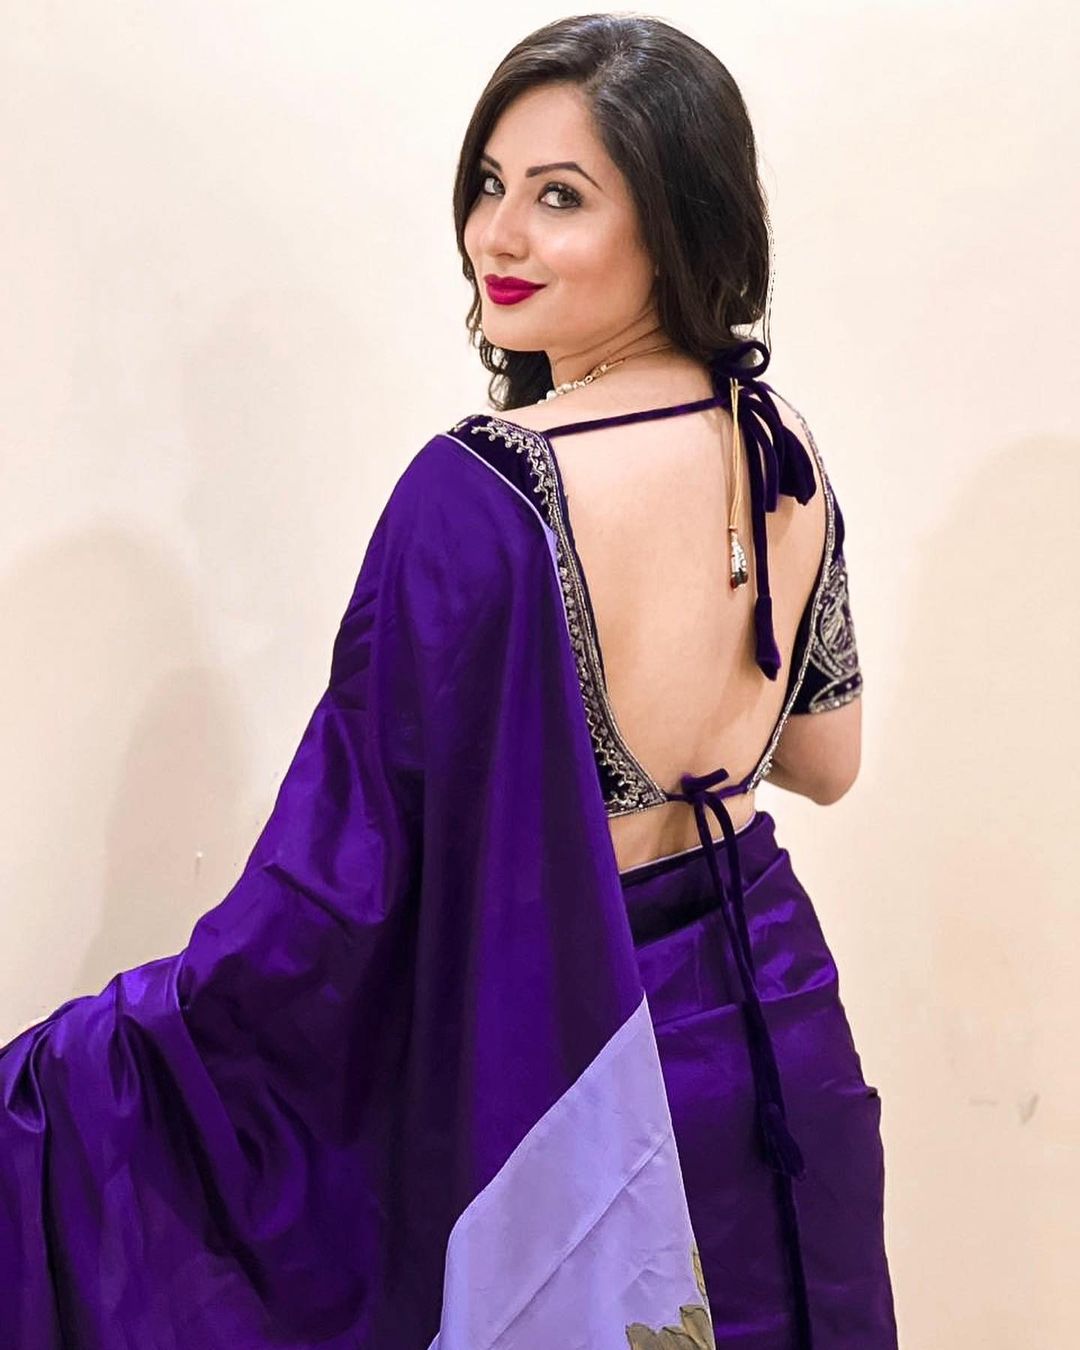 Bra or No Bra: The Ultimate Saree Dilemma – You Won't Believe the Answer!